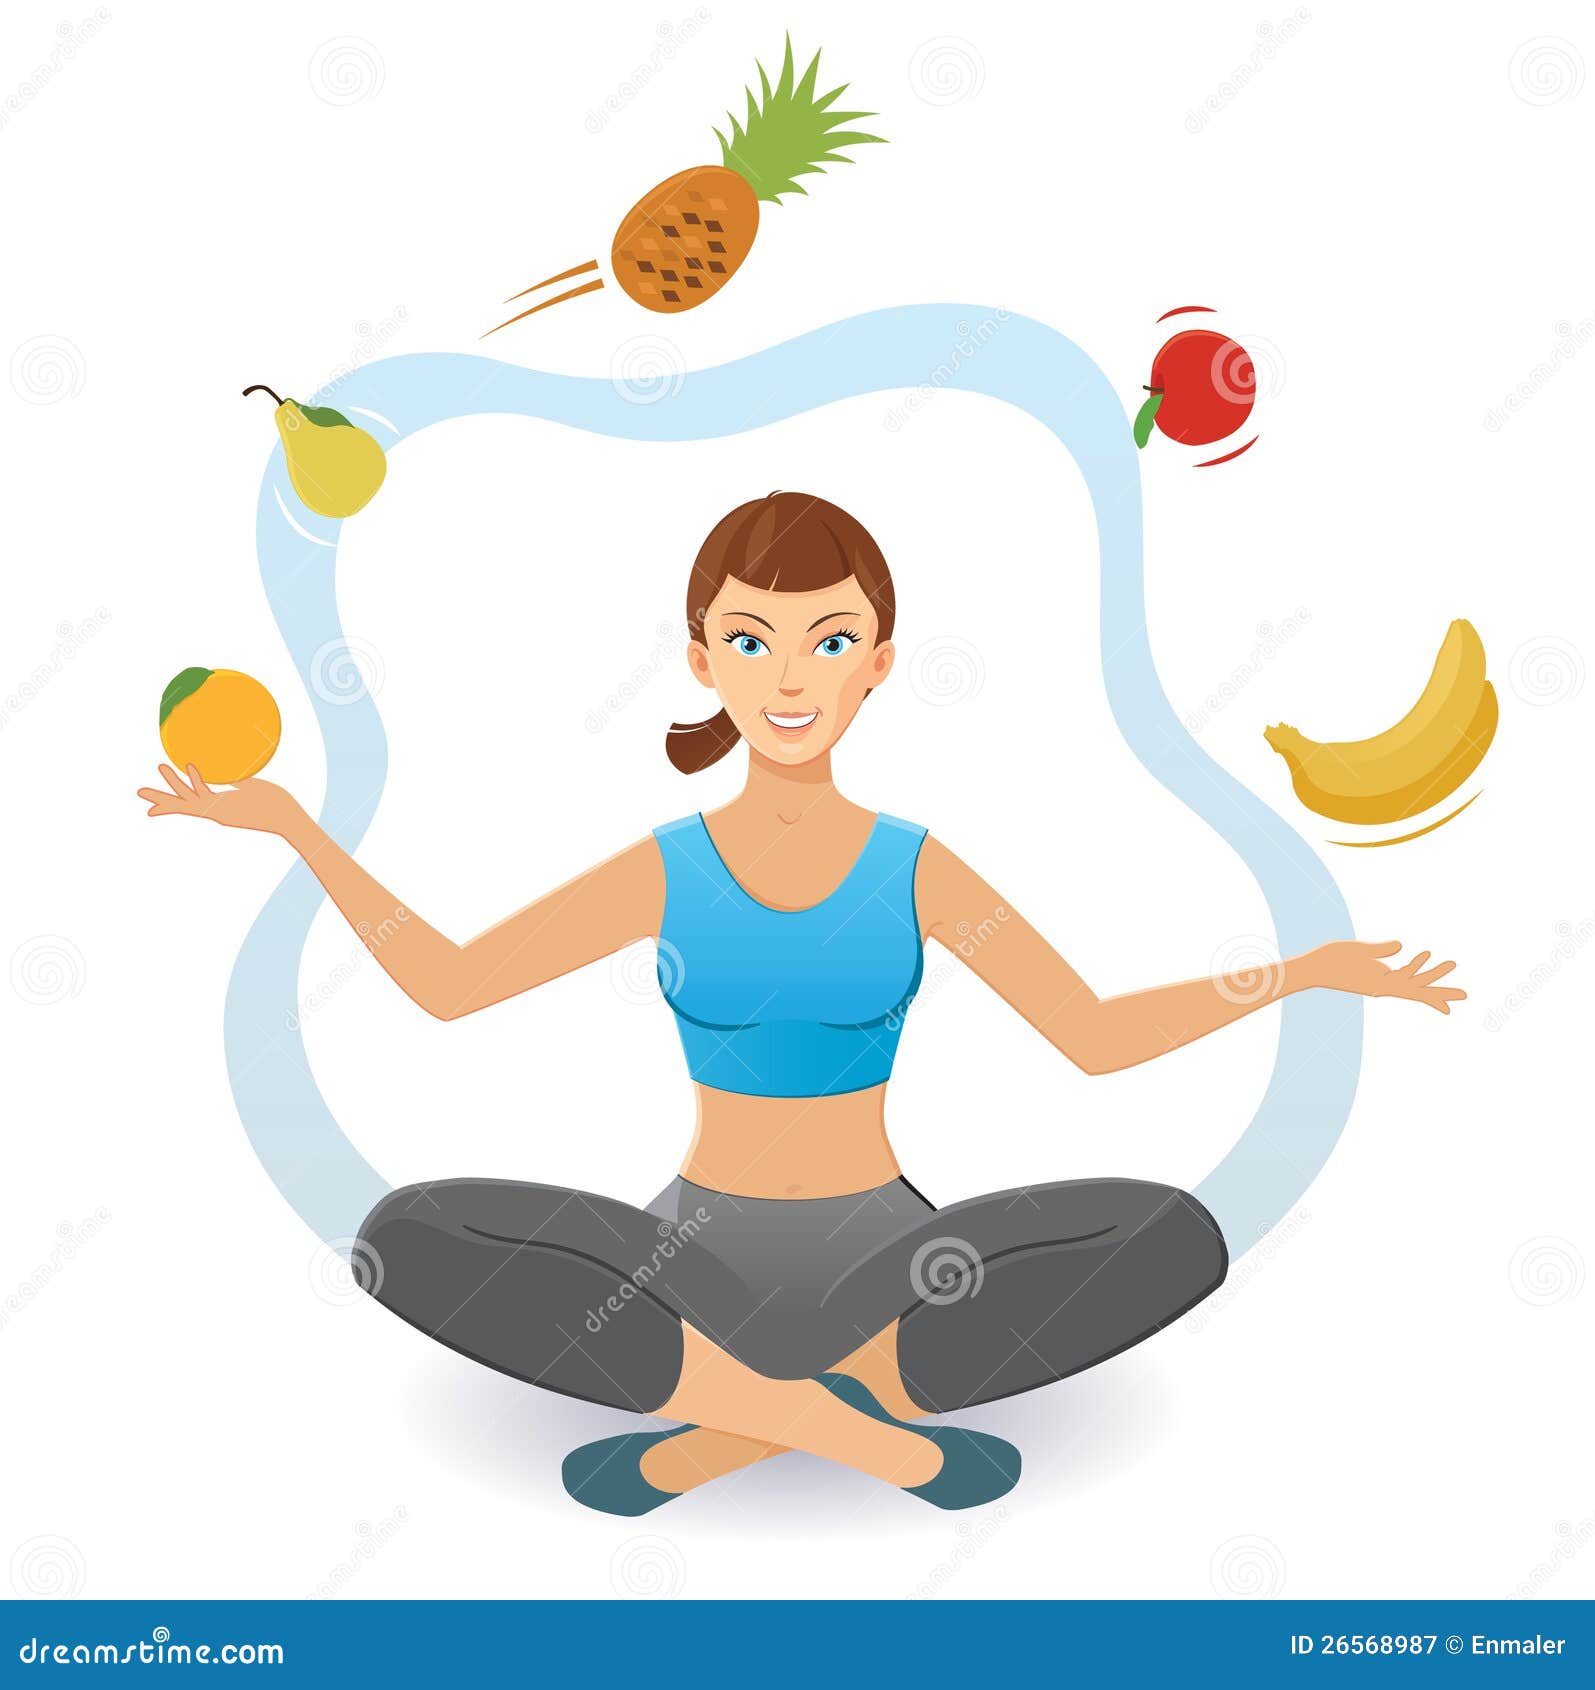 More similar stock images of ` Healthy life-style `